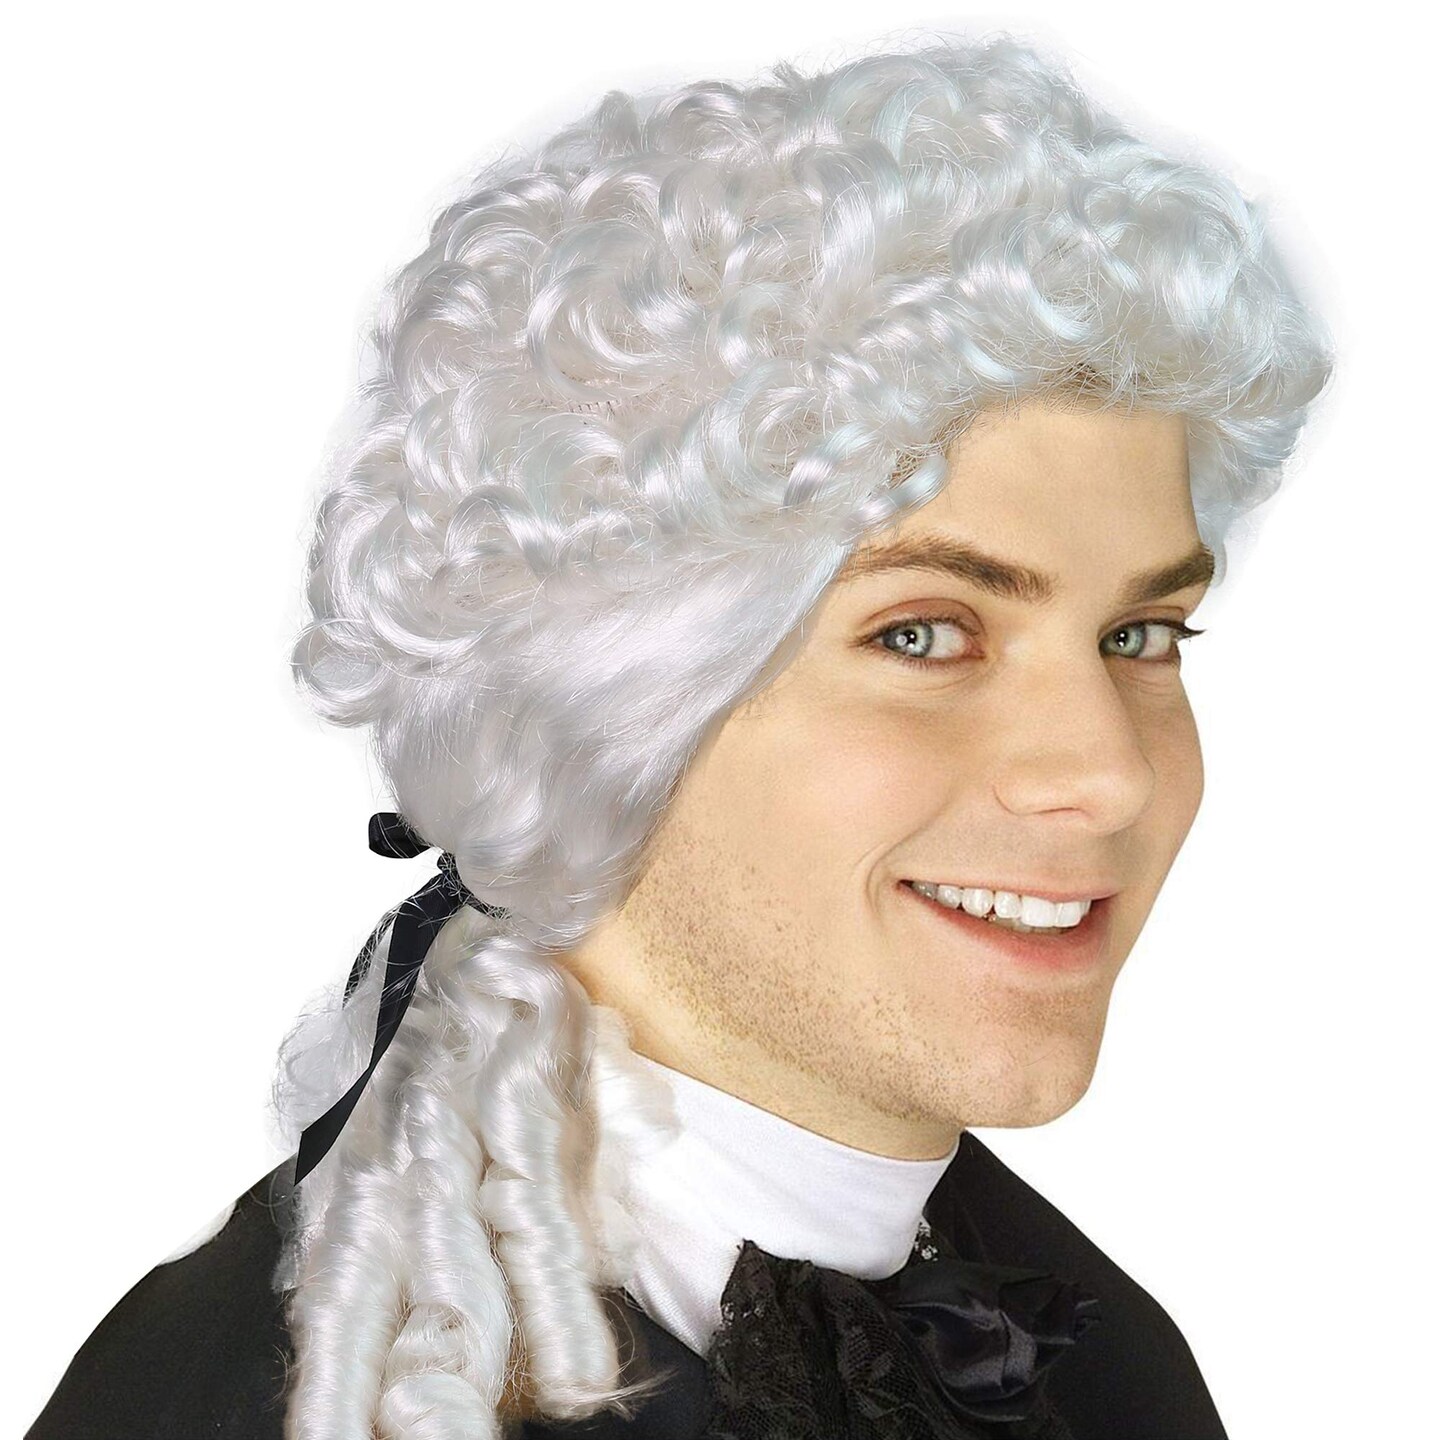 George Washington White Wig - Historical Colonial Powdered Wig with ...